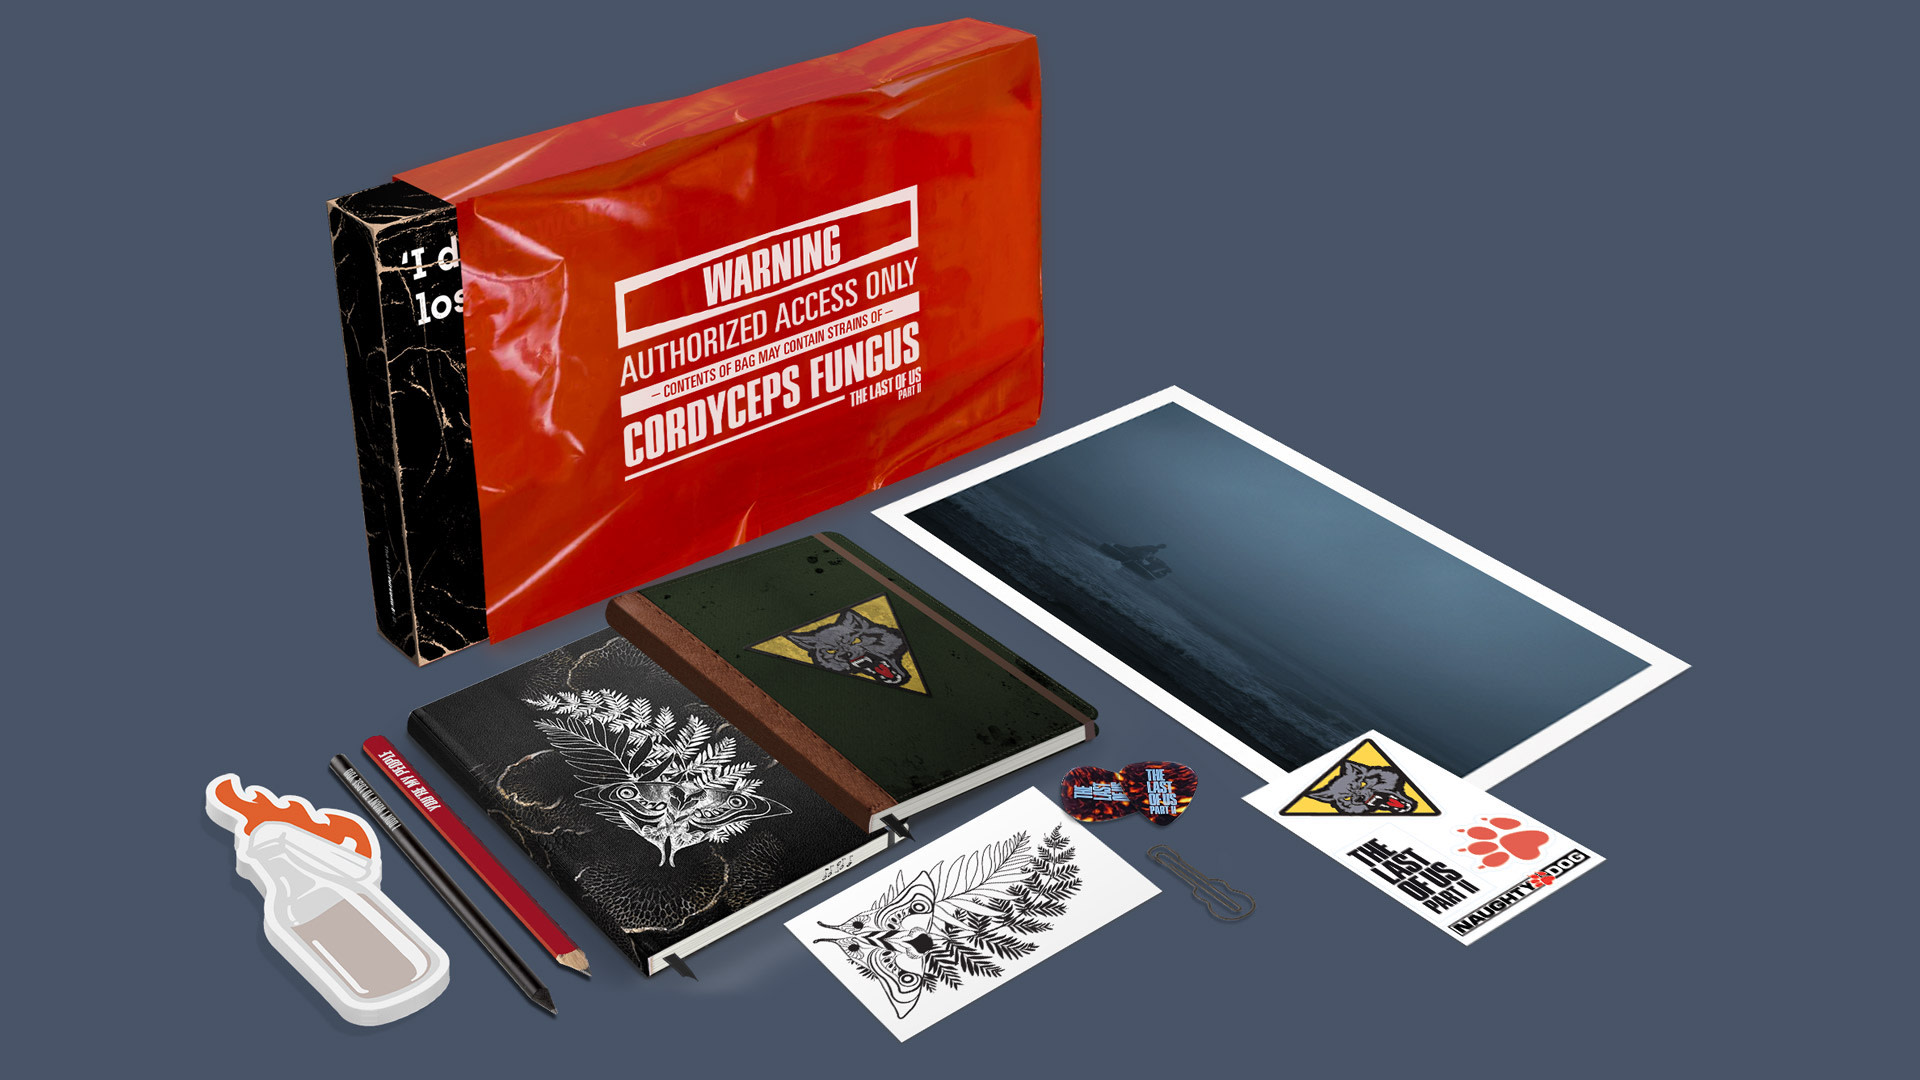 Our 5 most beautiful video game notebooks